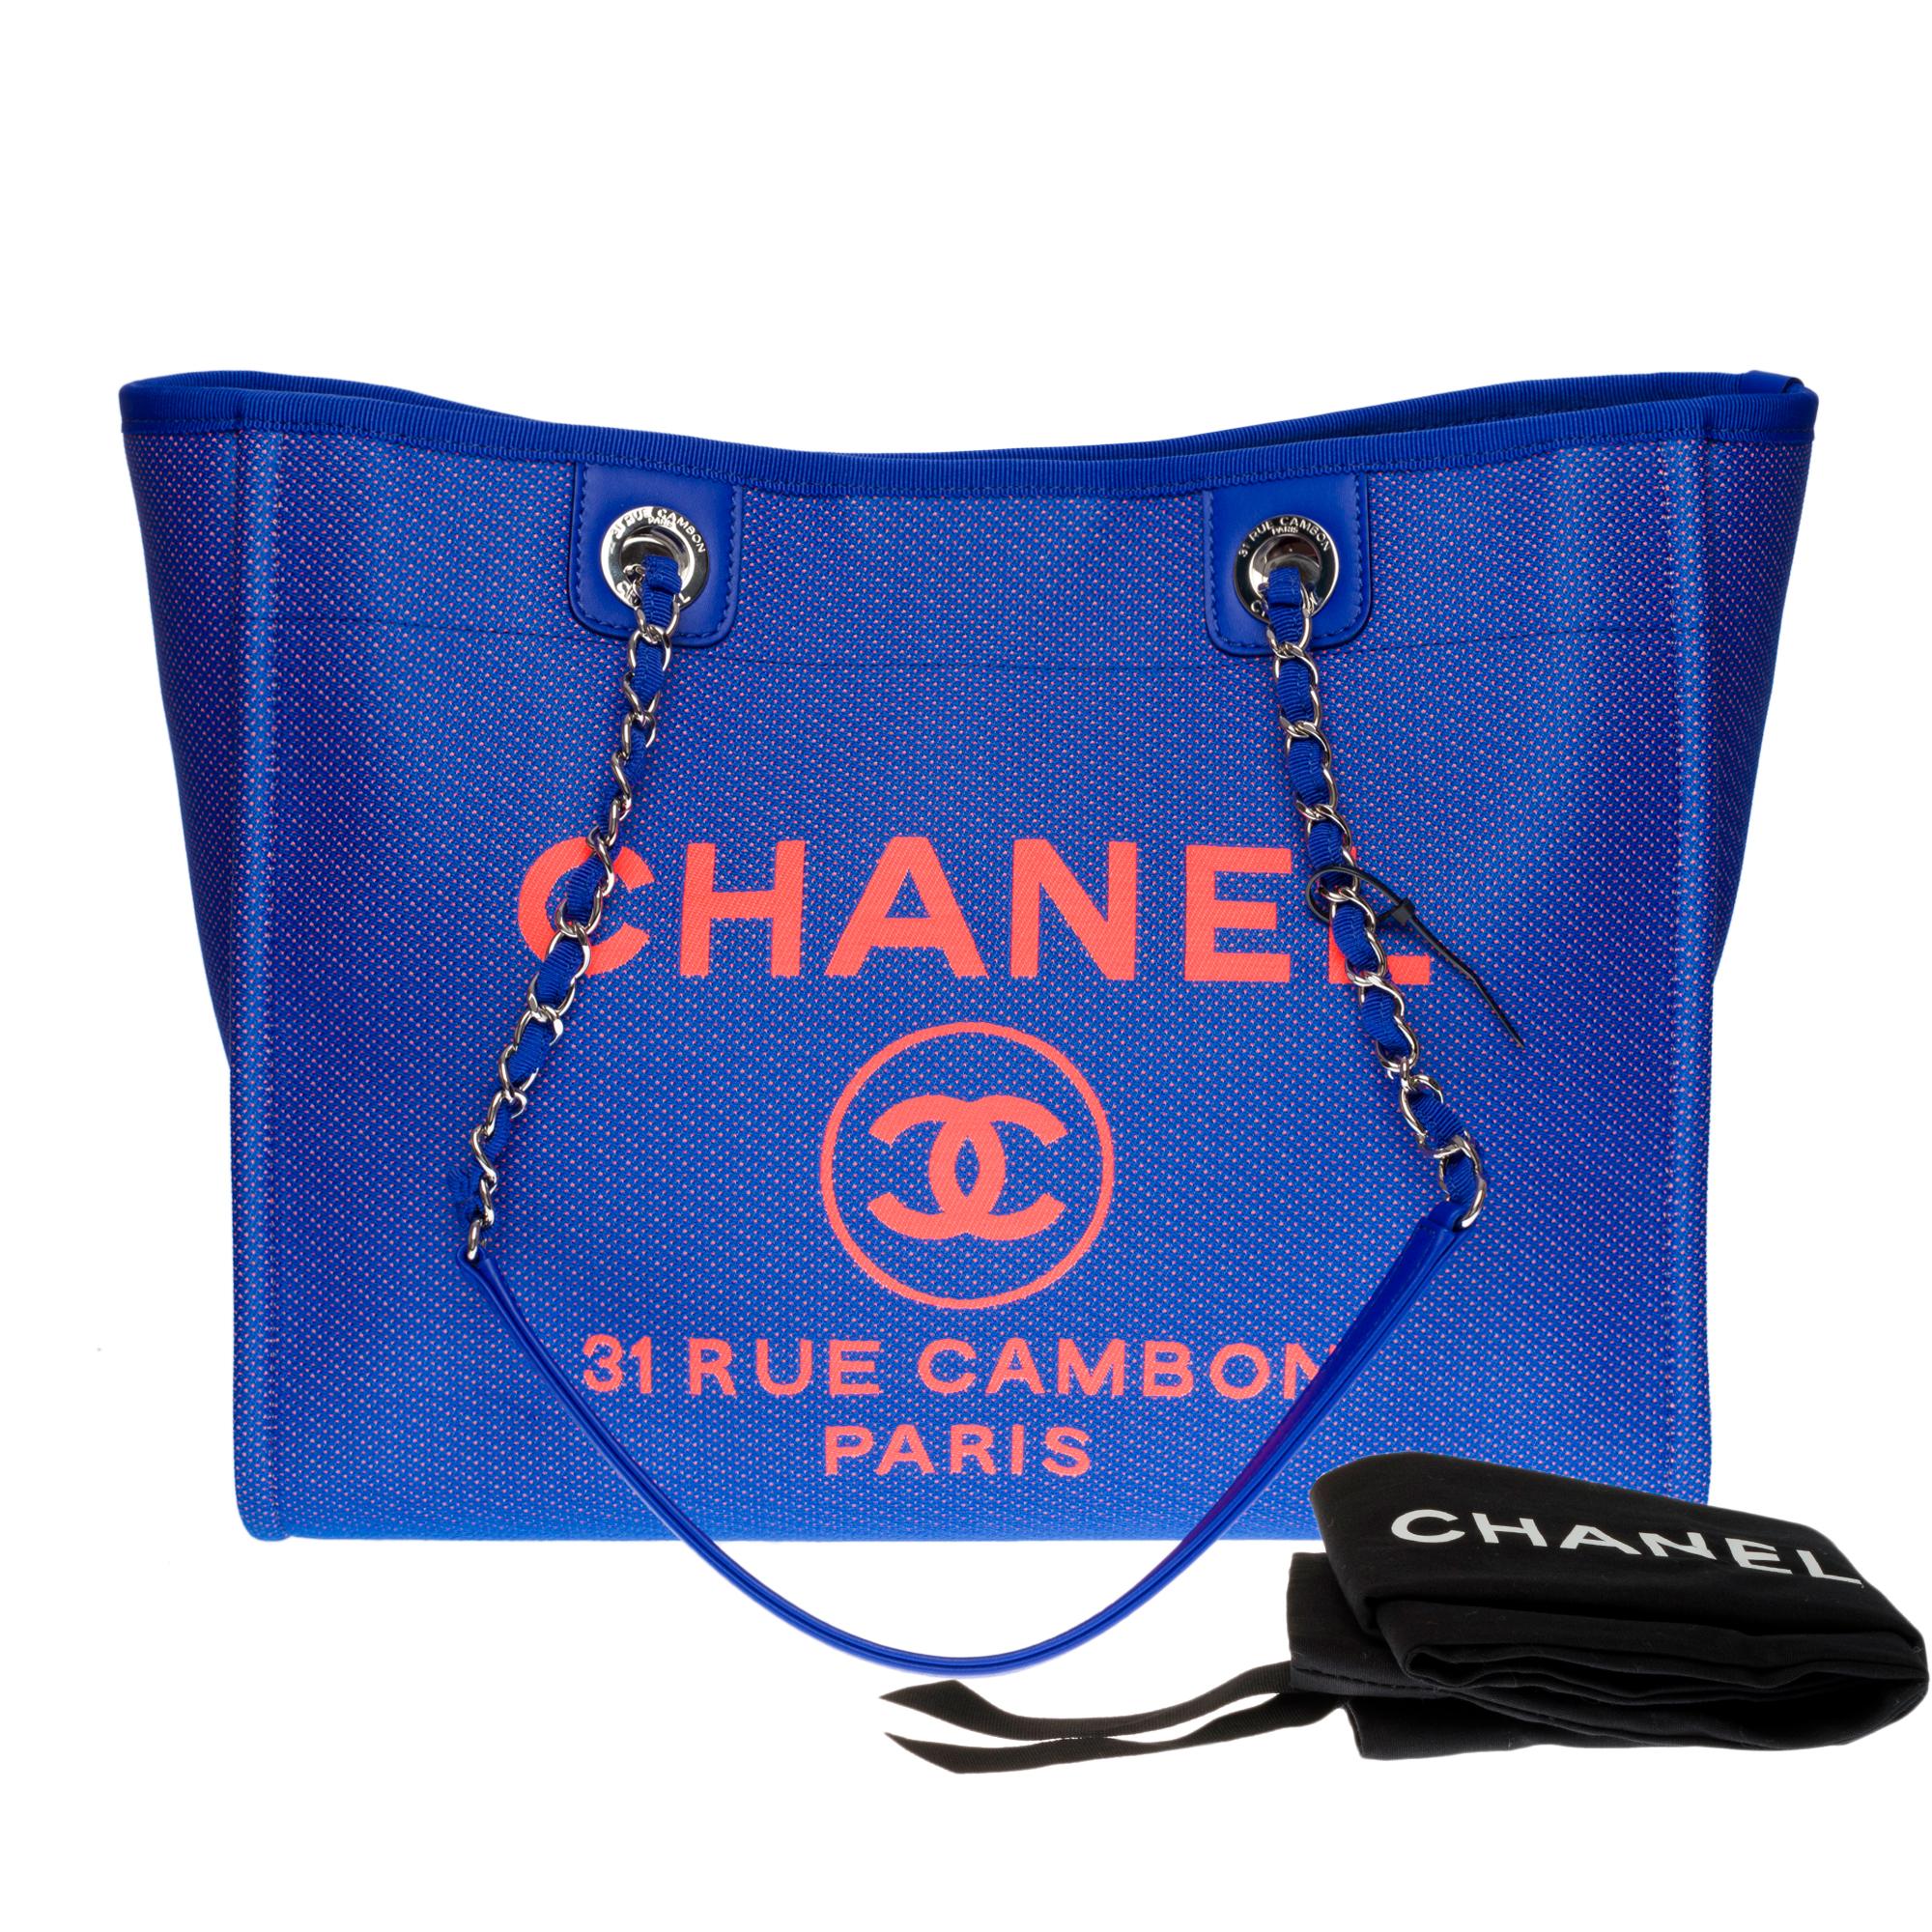 Amazing Chanel Deauville Tote bag in blue electric and orange canvas, SHW 4